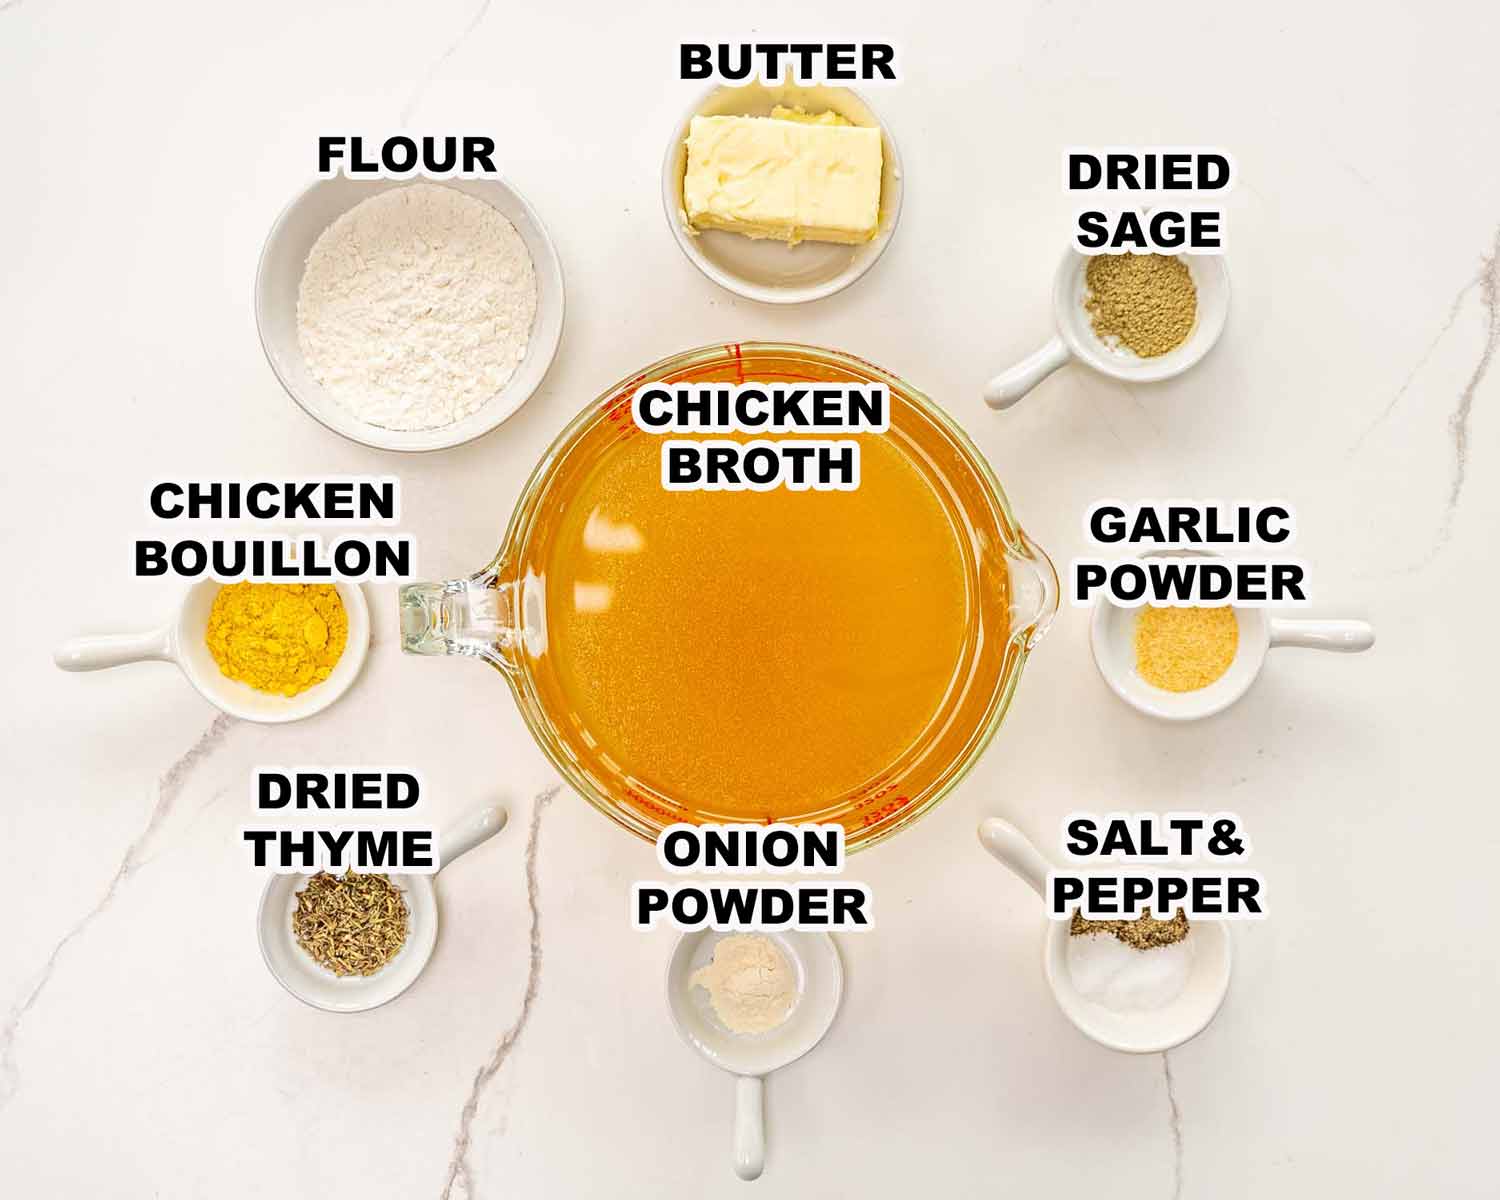 ingredients needed to make no drippings gravy.